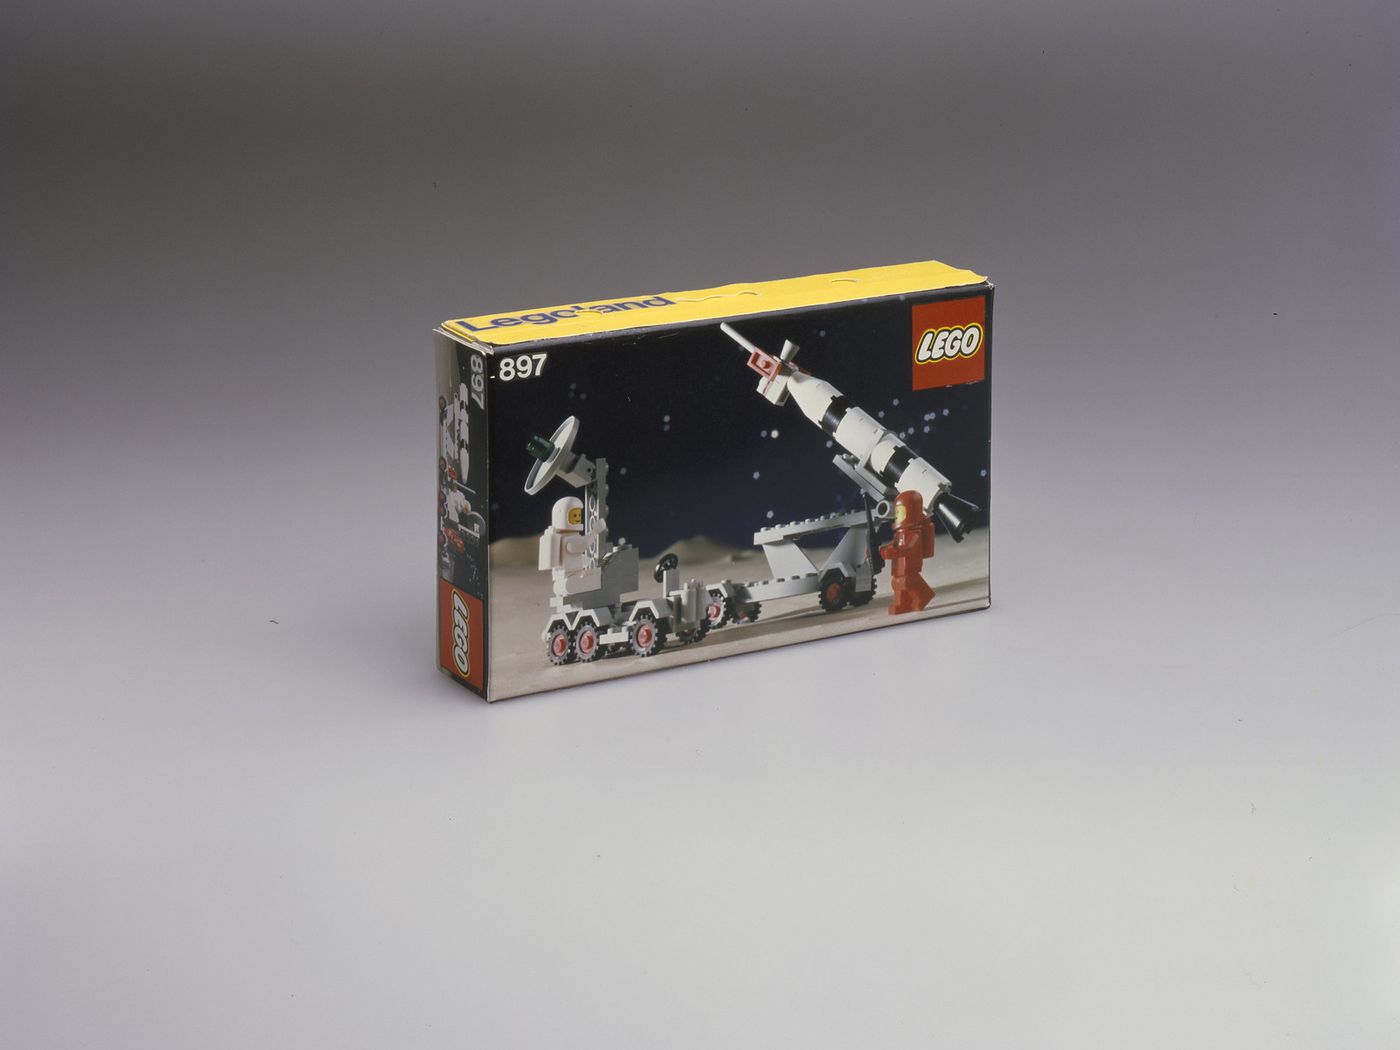 A Lego designer talks about designing spaceships and collaborating with  NASA - The Verge